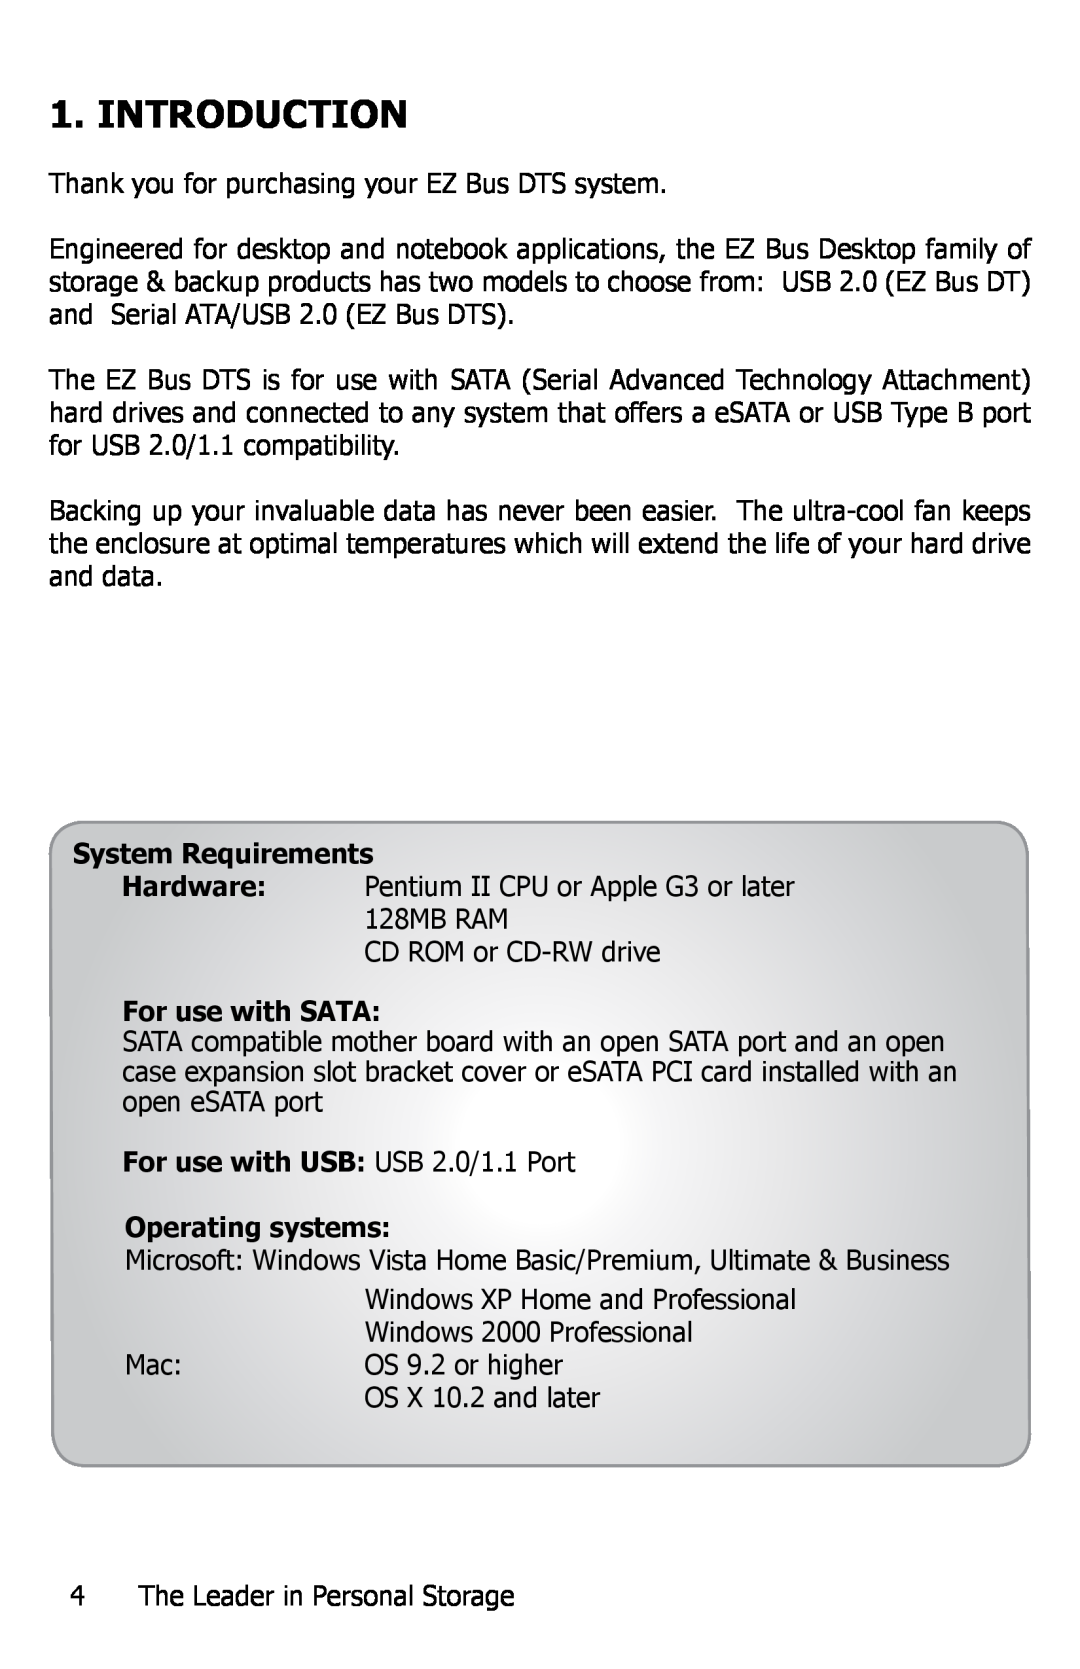 Apricorn EZ Bus DTS manual Introduction, System Requirements, For use with SATA 